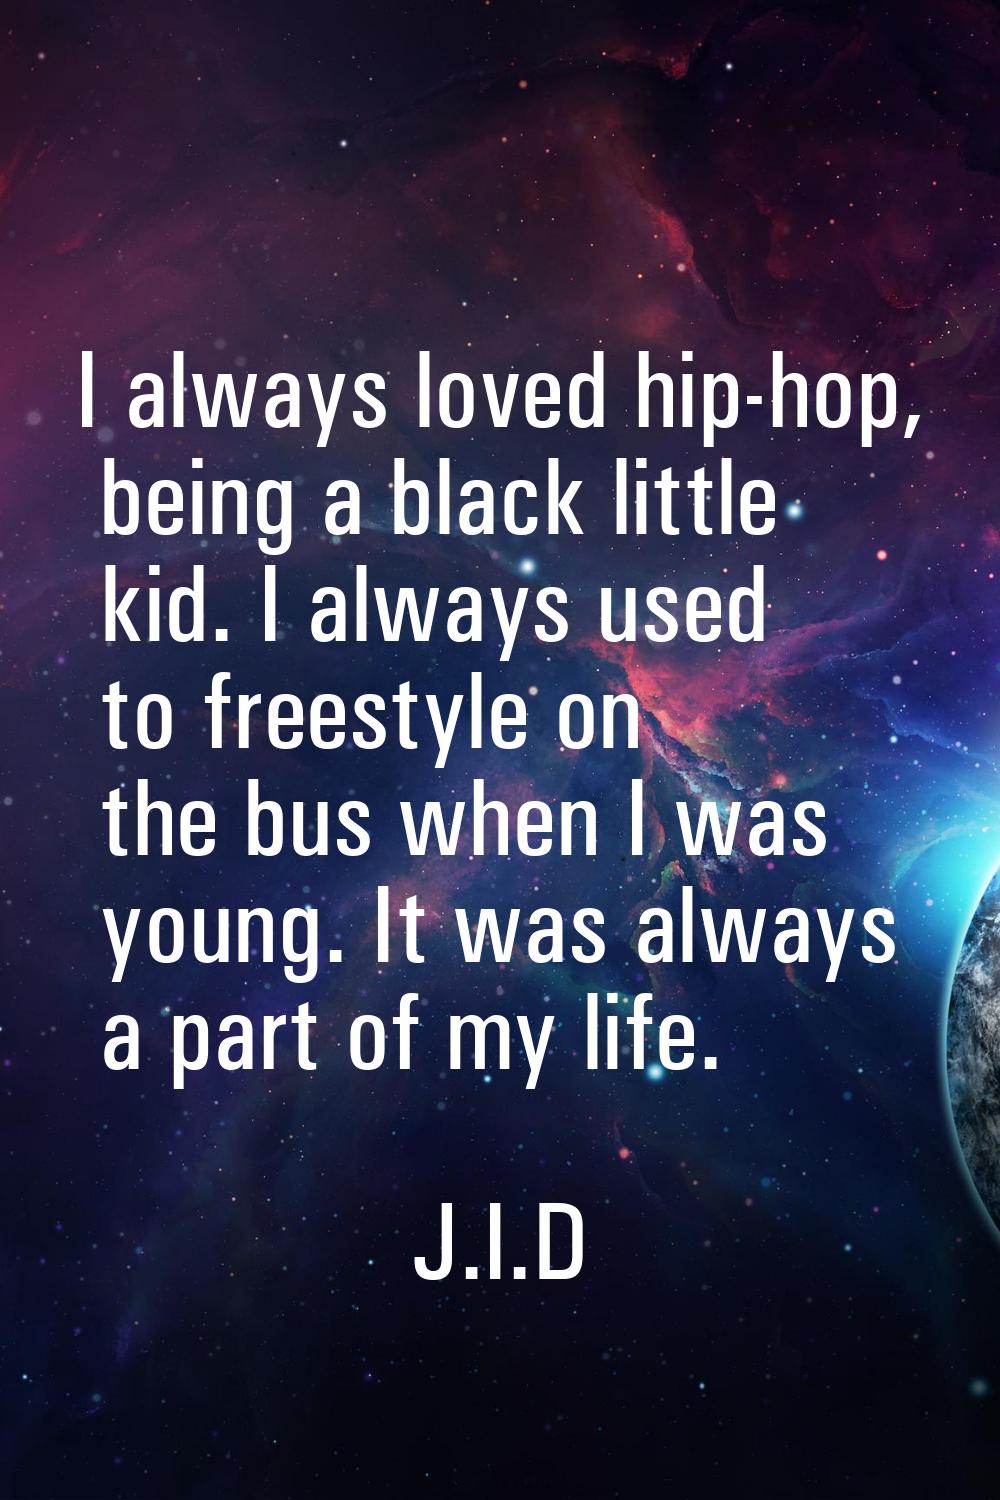 I always loved hip-hop, being a black little kid. I always used to freestyle on the bus when I was 